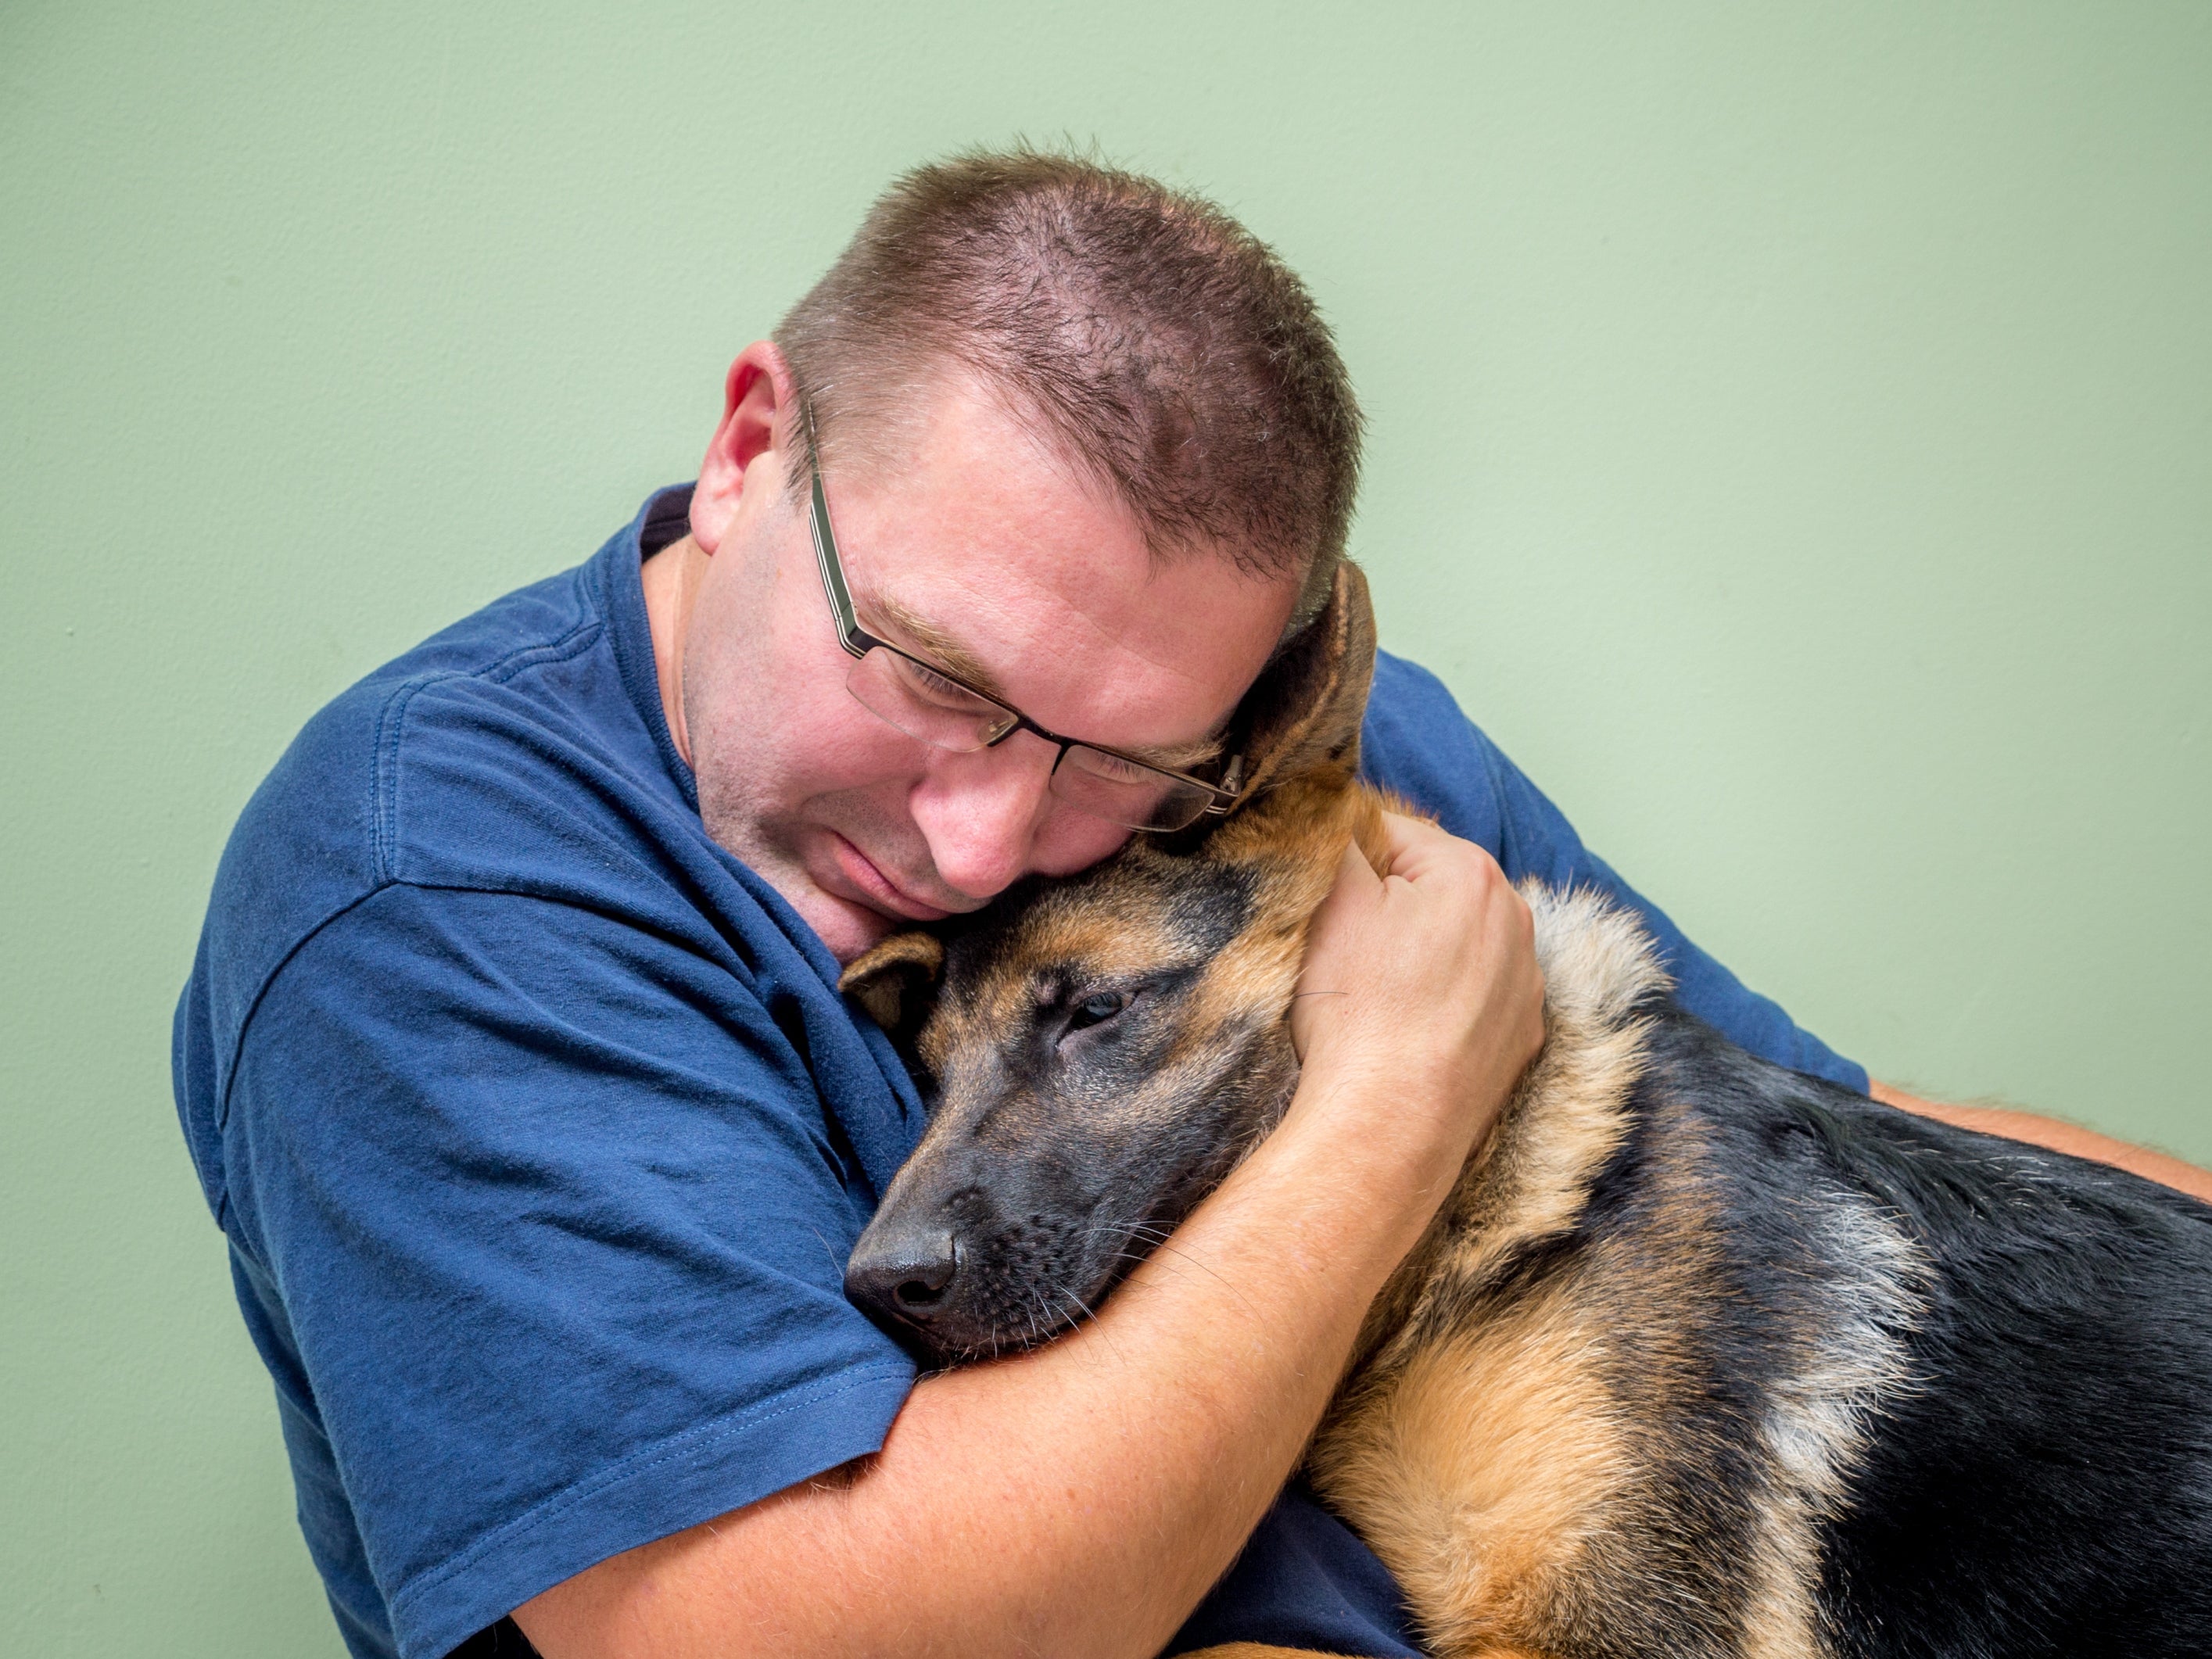 10 Tips for Coping with the Loss of a Pet